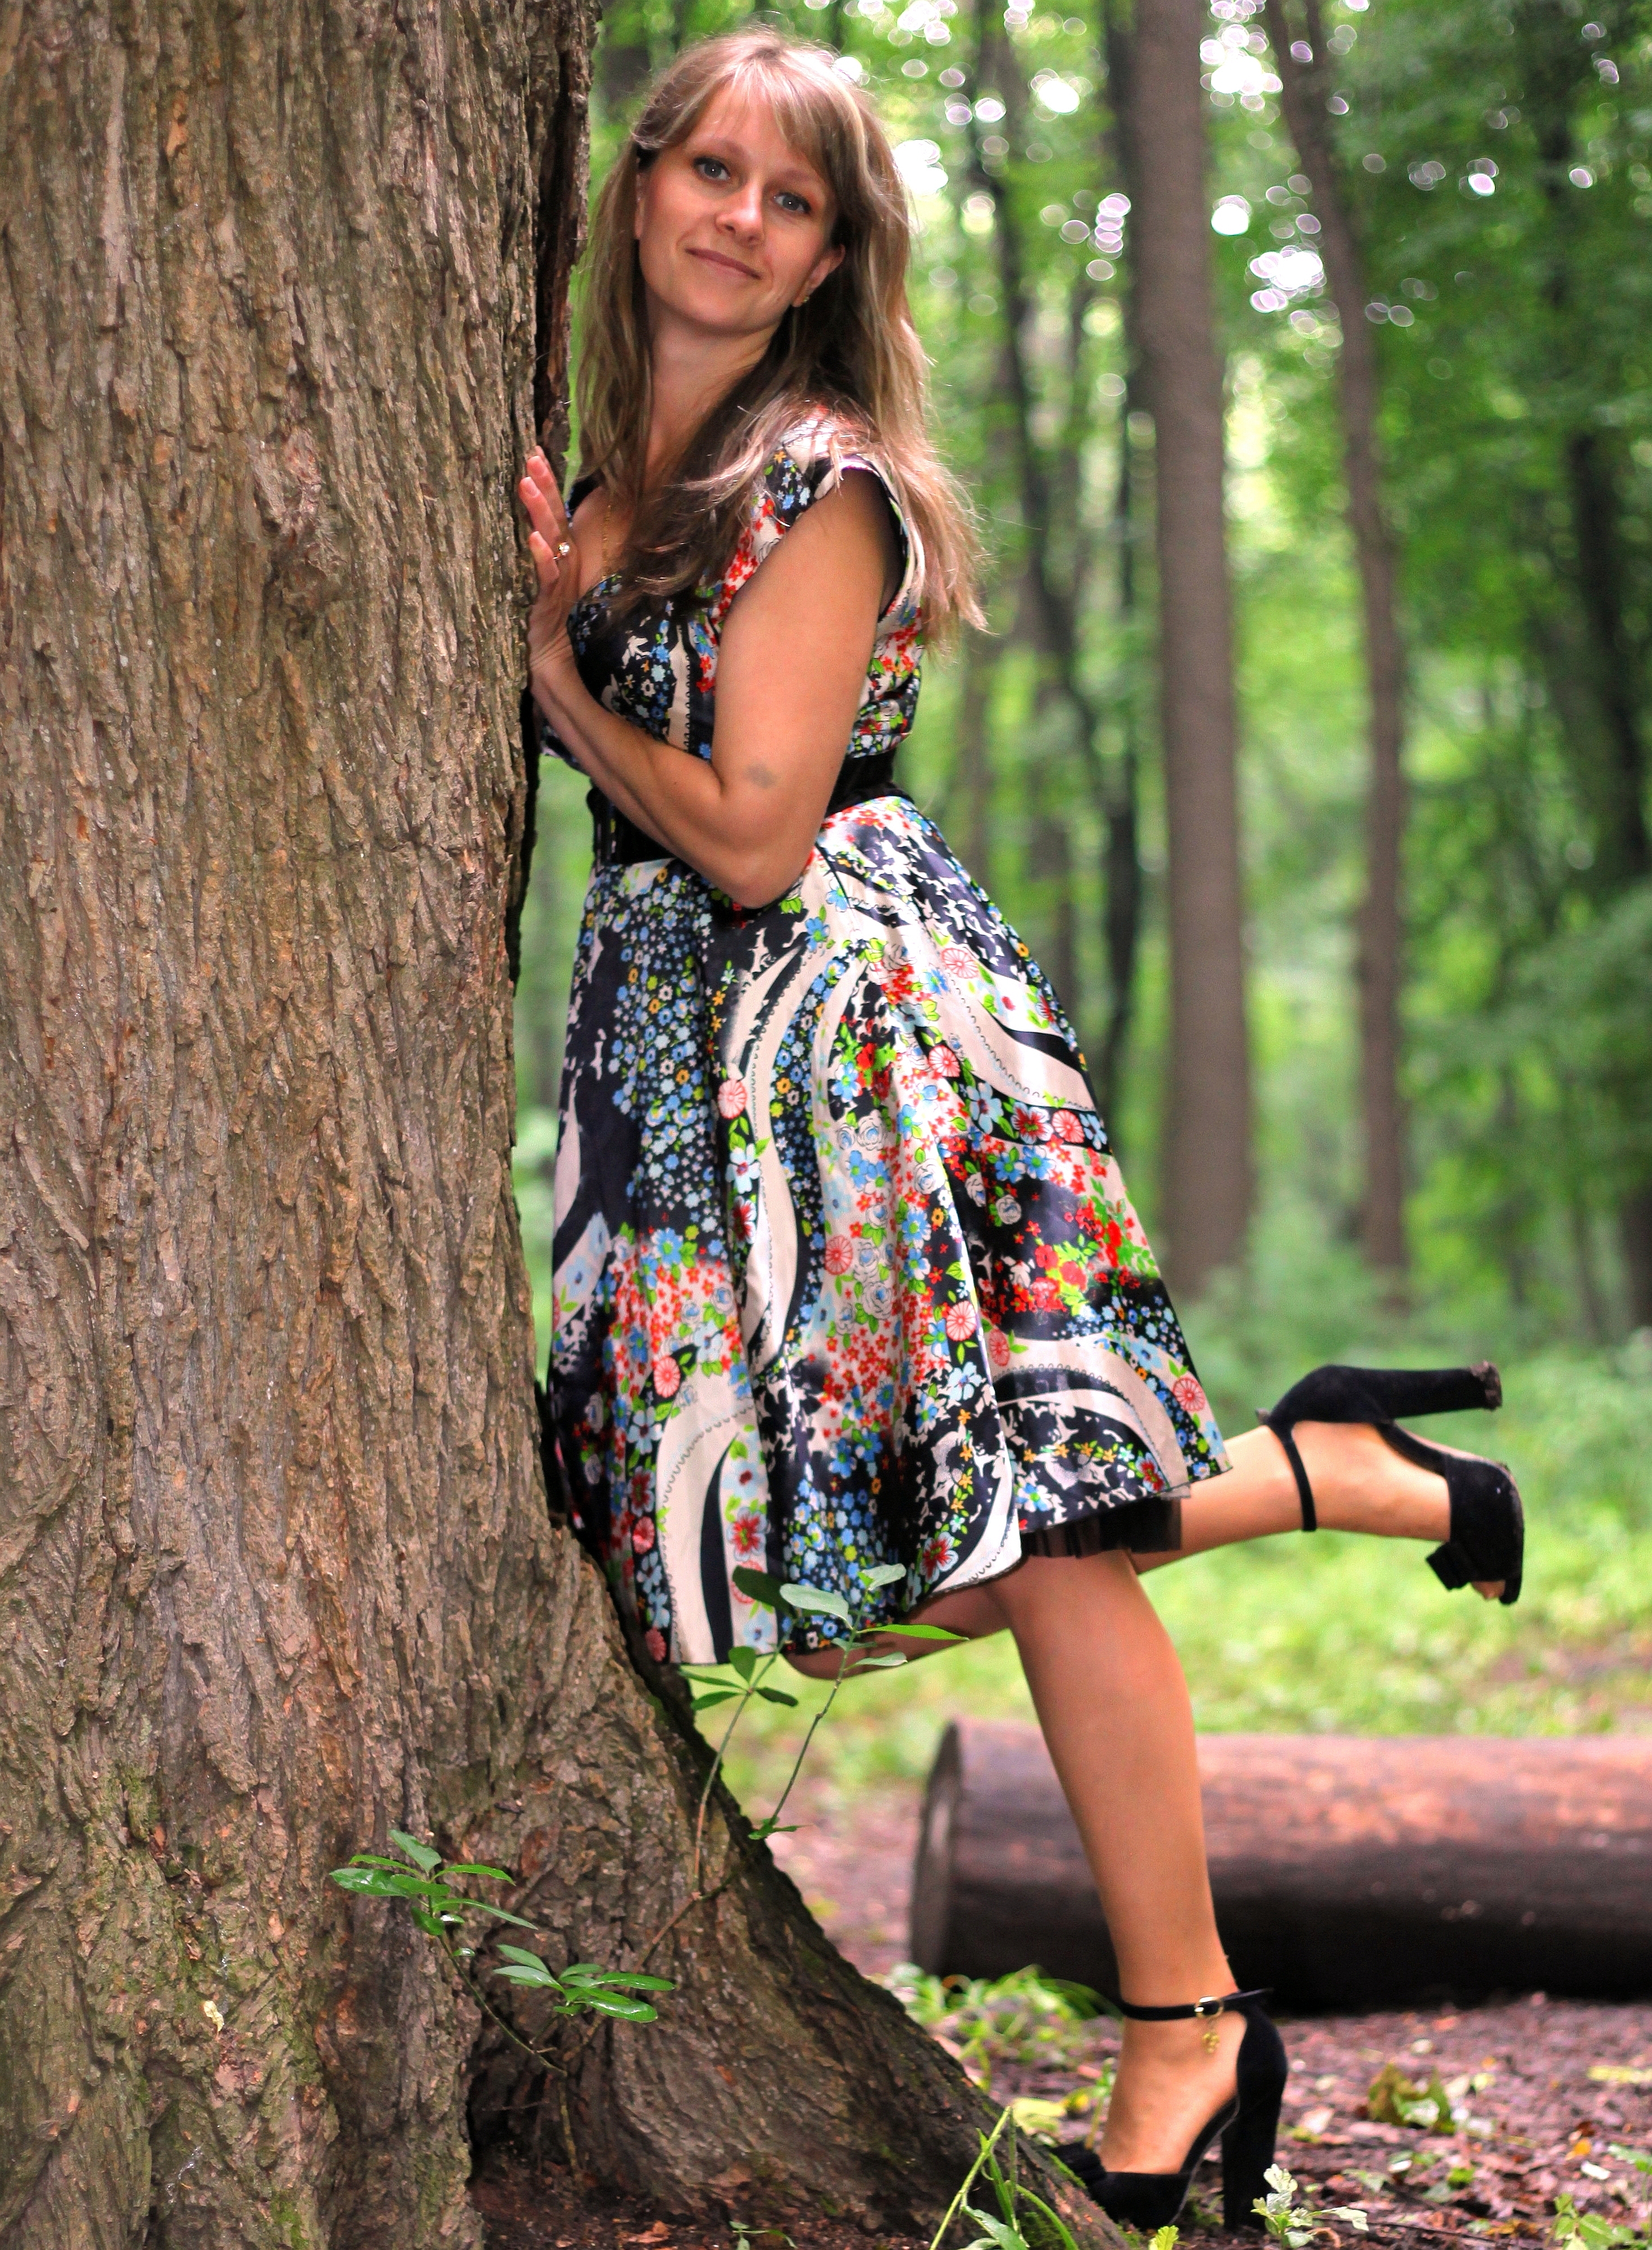 a young Catholic woman wearing a colorful dress in a forest in June 2013, portrait 1/9